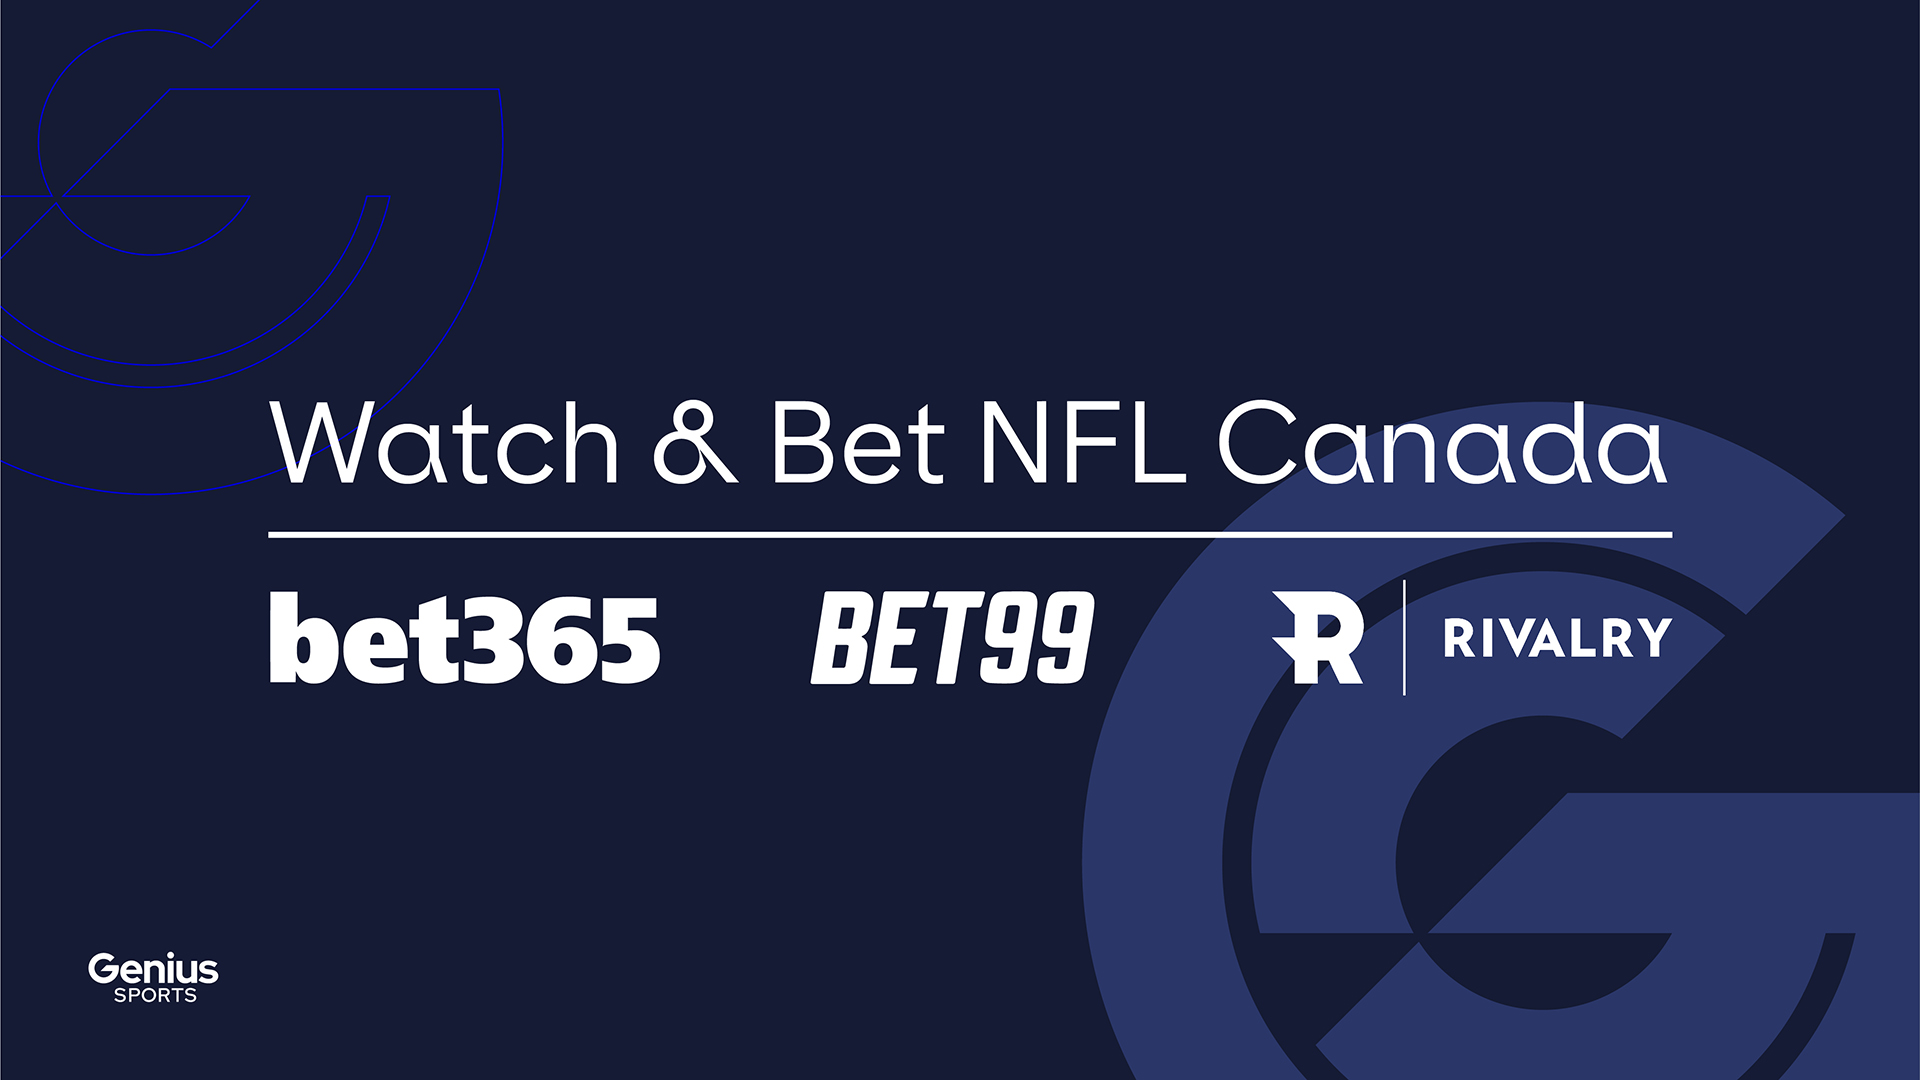 Genius Sports Strikes ‘Watch & Bet’ Partnerships for NFL Video Streams in Canada with Three Approved Sportsbooks